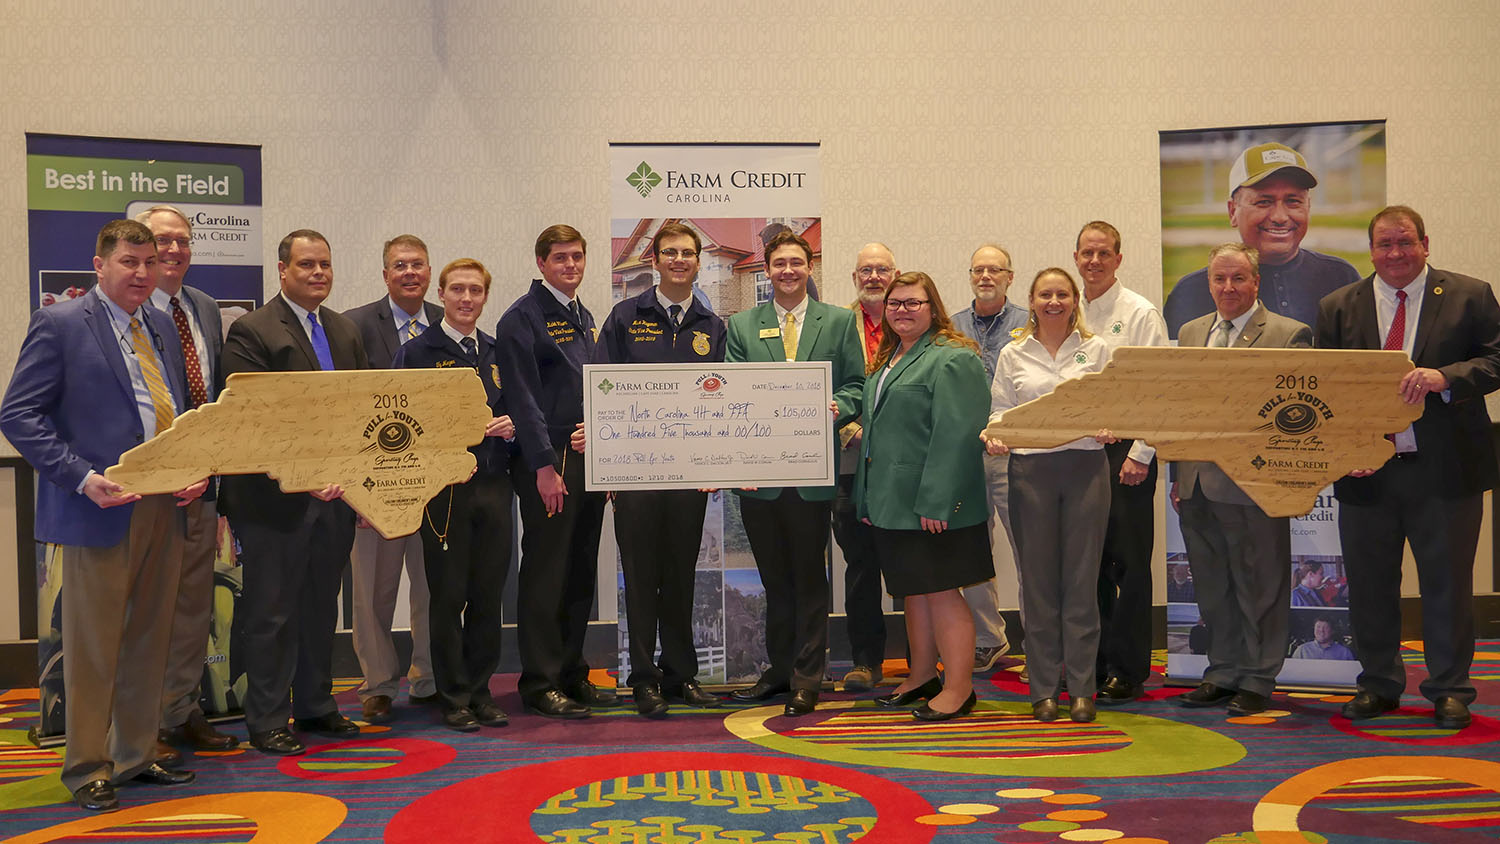 15 people holding a check for $105,000 and two large wooden plaques in the shape of North Carolina